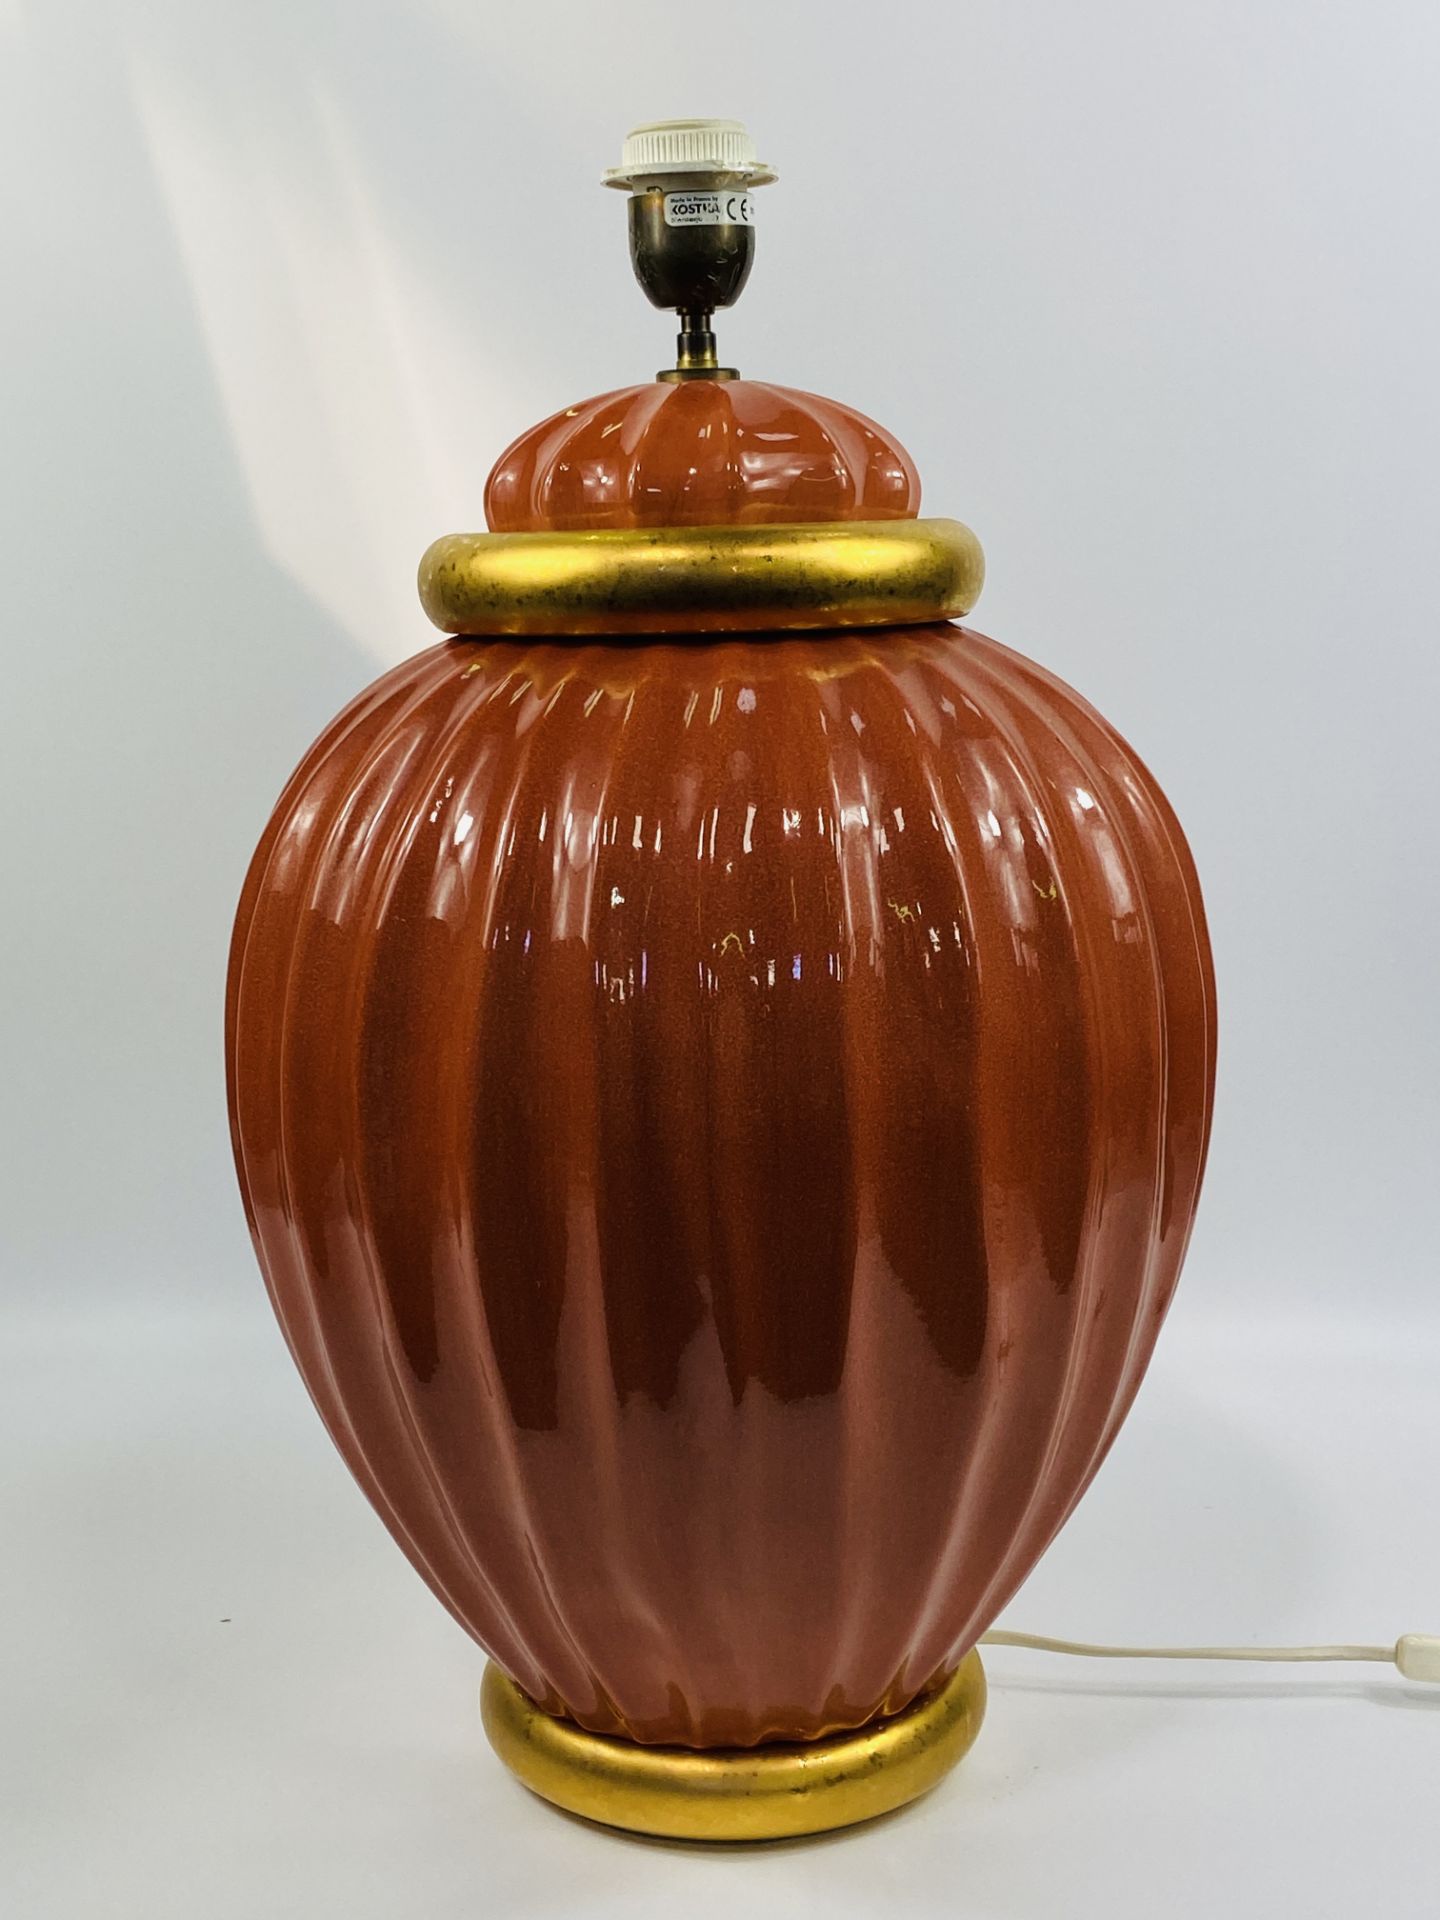 Ribbed ceramic table lamp - Image 2 of 4